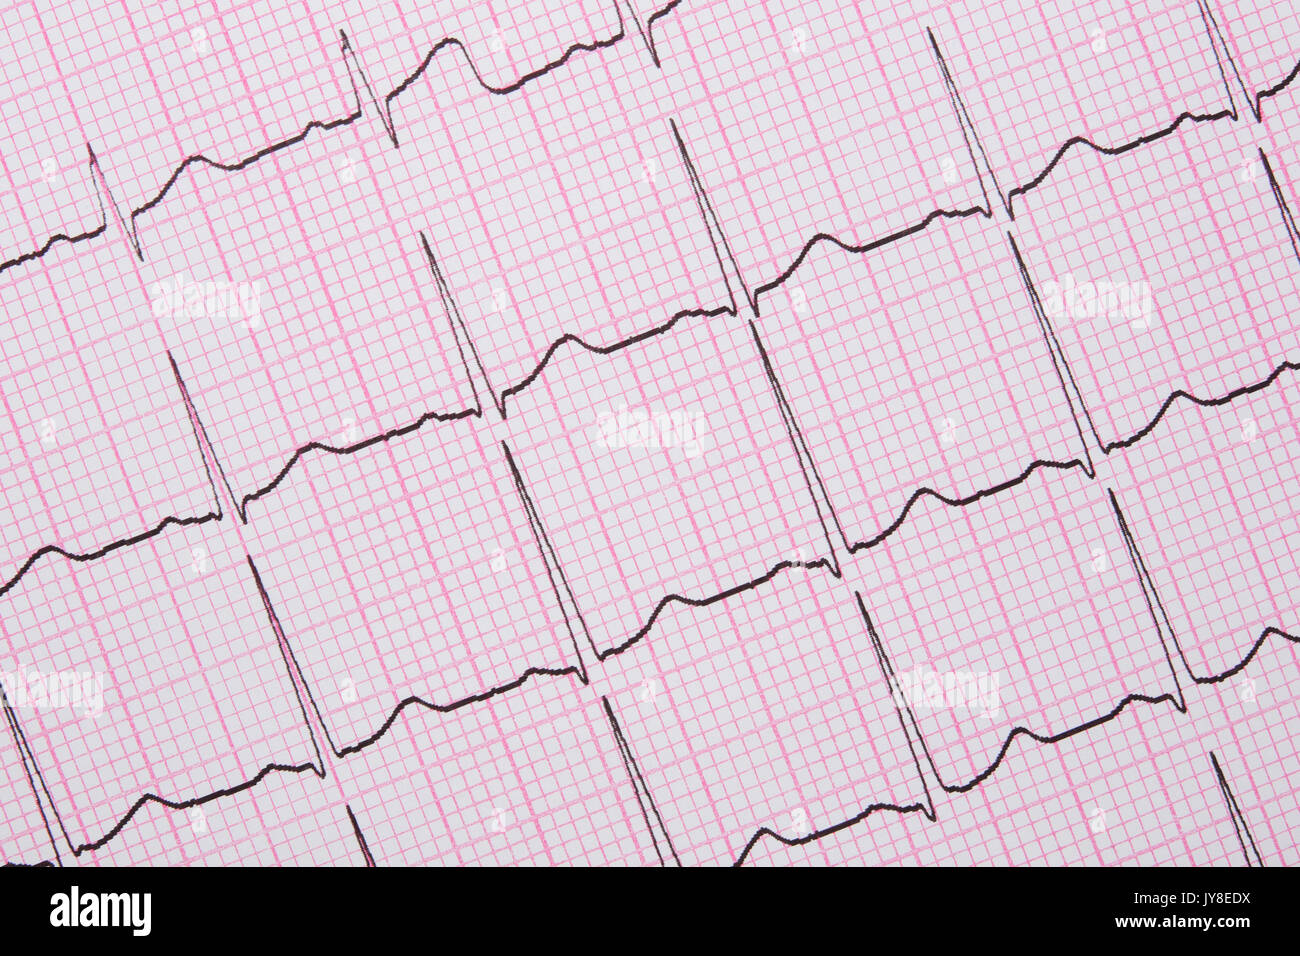 Close up of a Electrocardiograph also known as a EKG or ECG graph Stock Photo